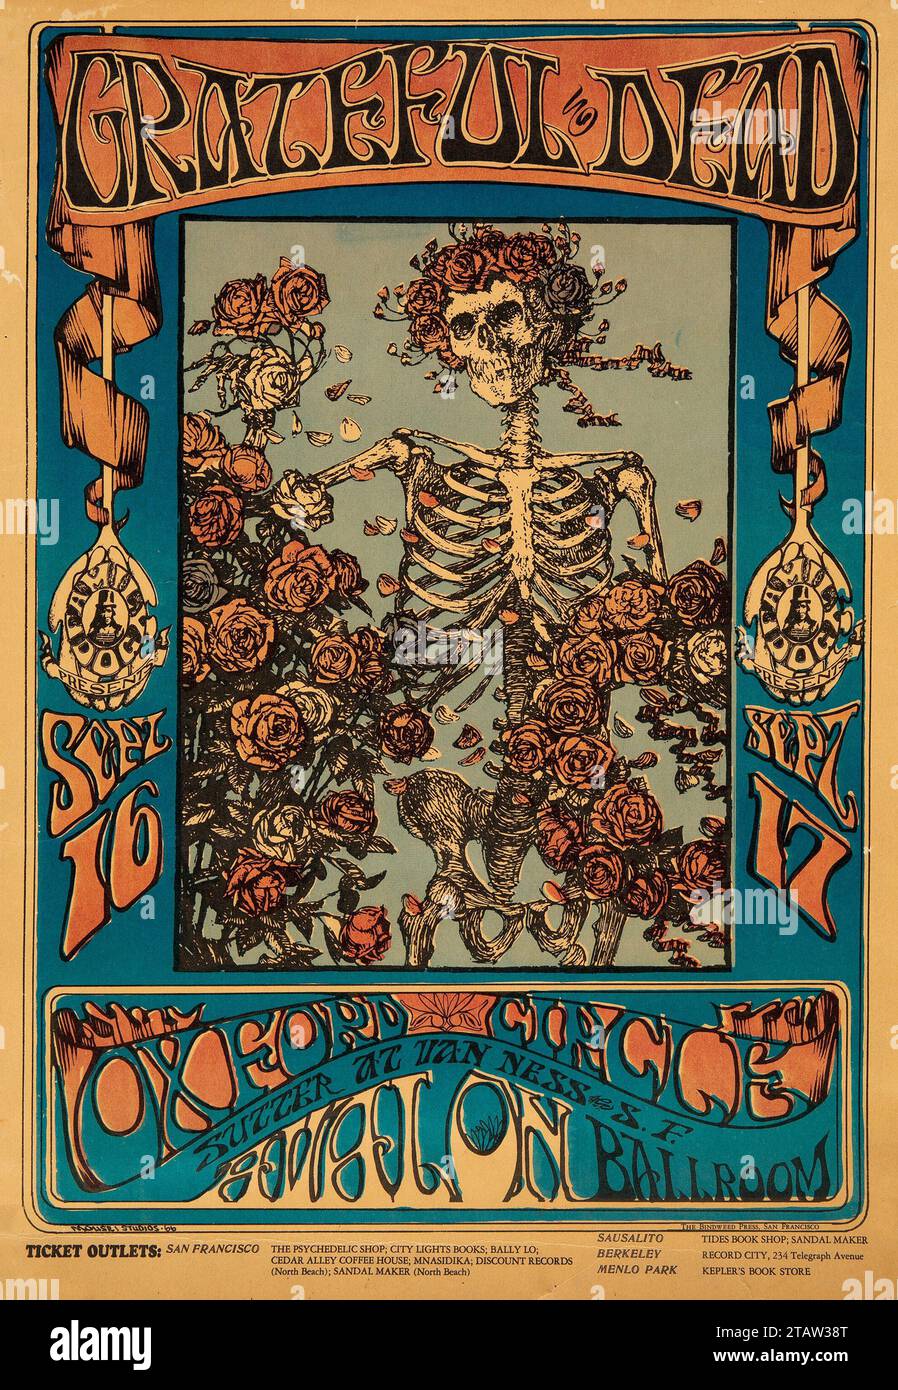 Grateful Dead 'Skeleton & Roses' Avalon Ballroom, San Francisco. Old Concert Poster (this is the first version) Stock Photo